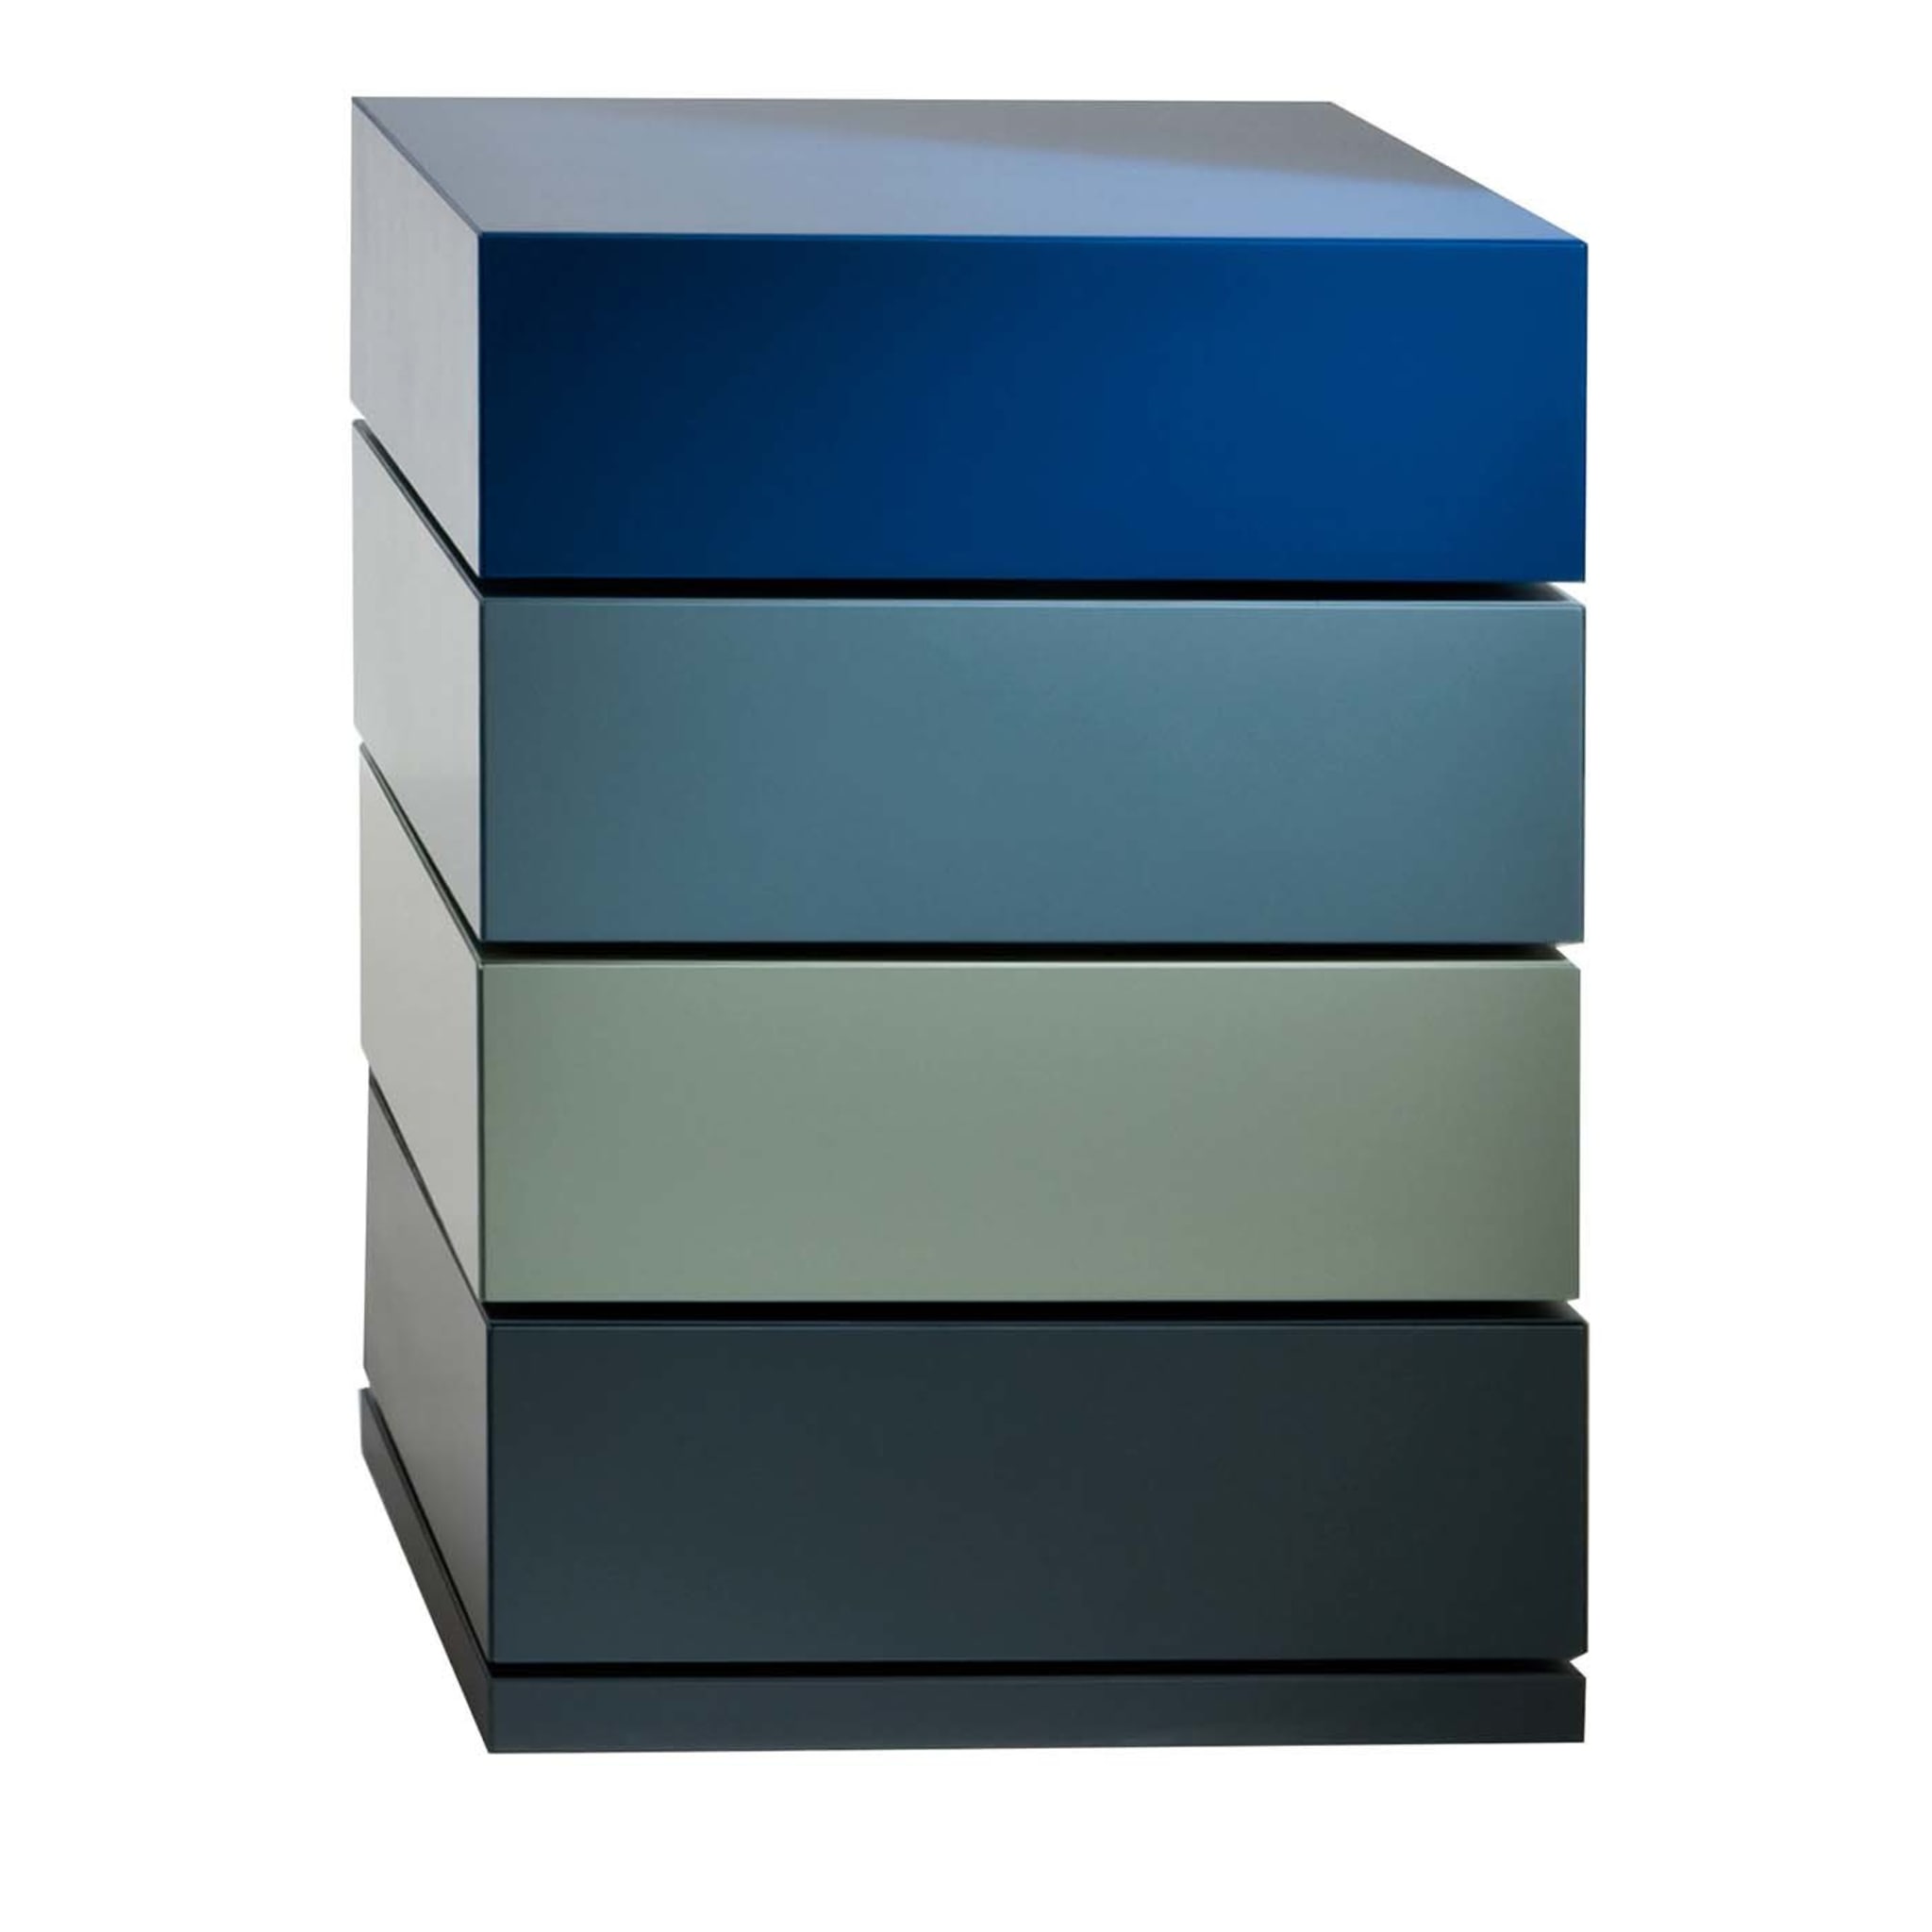 Cubick Swivel Chest of Drawers by Paolo Nicolò Rusolen - Main view